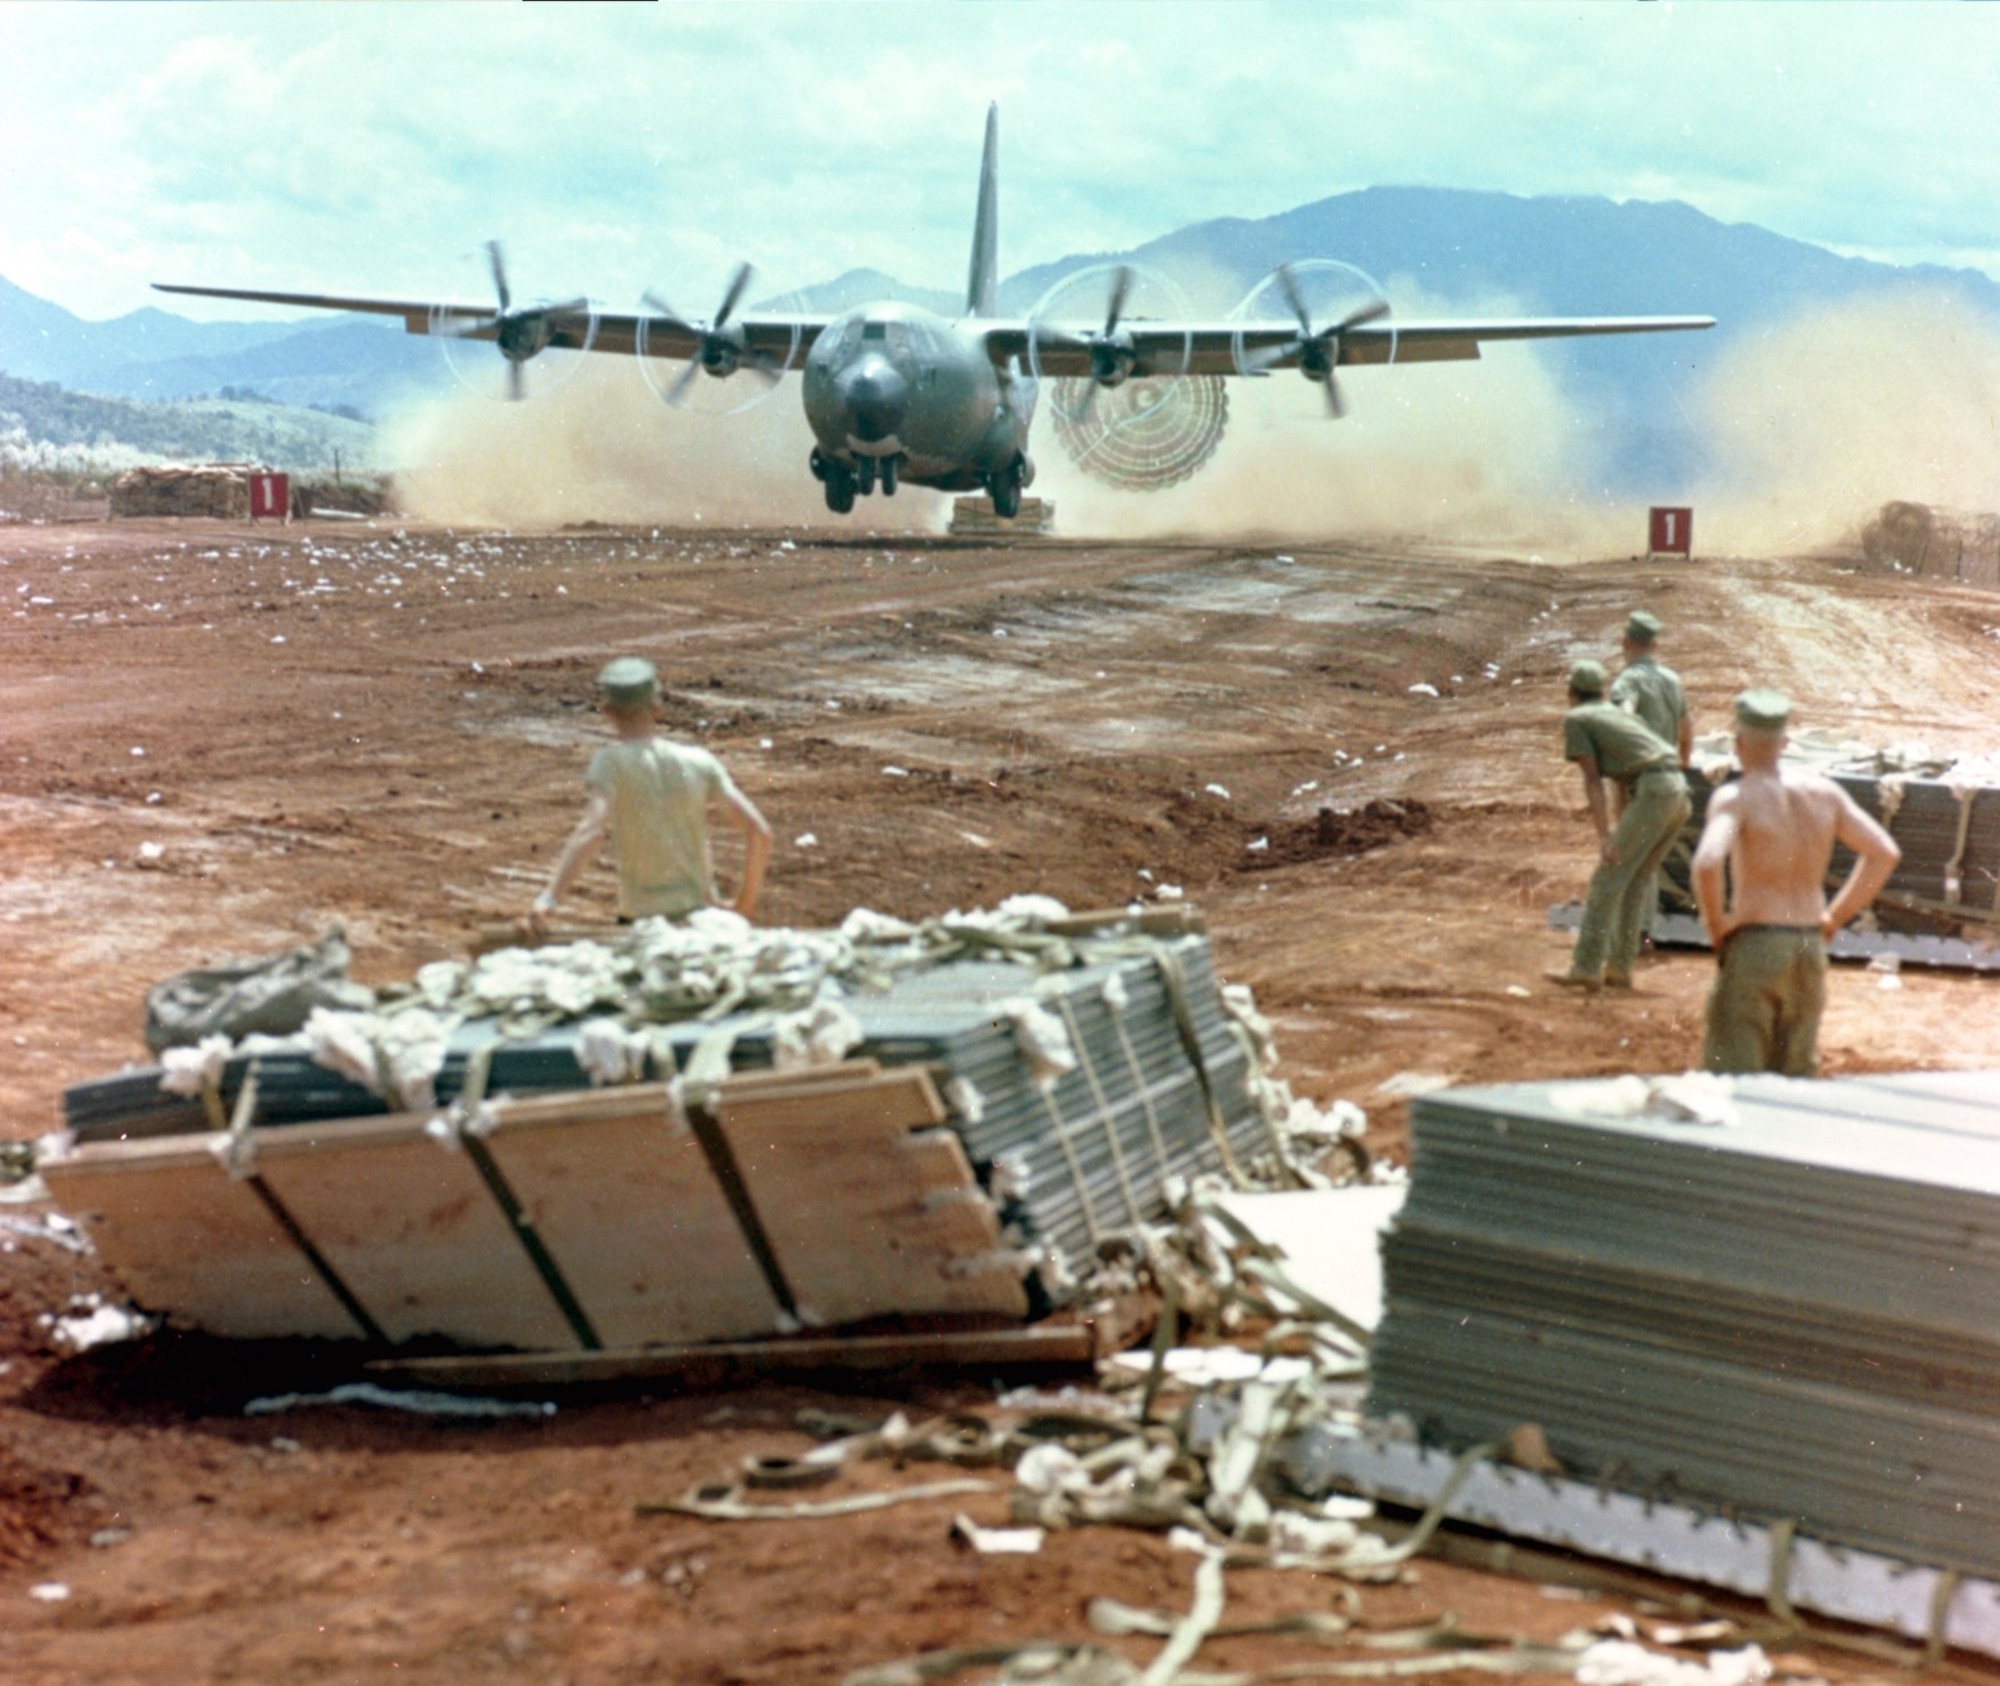 Khe Sanh, South Vietnam, an isolated United States Marine Corps out post during the Vietnam War became too dangerous to land due to hostile ground fire and shelling. To accommodate, C-130s used the Low Altitude Extraction System and kept the Marines resupplied with rations, fuel, ammunition and medical supplies. (Courtesy photo)